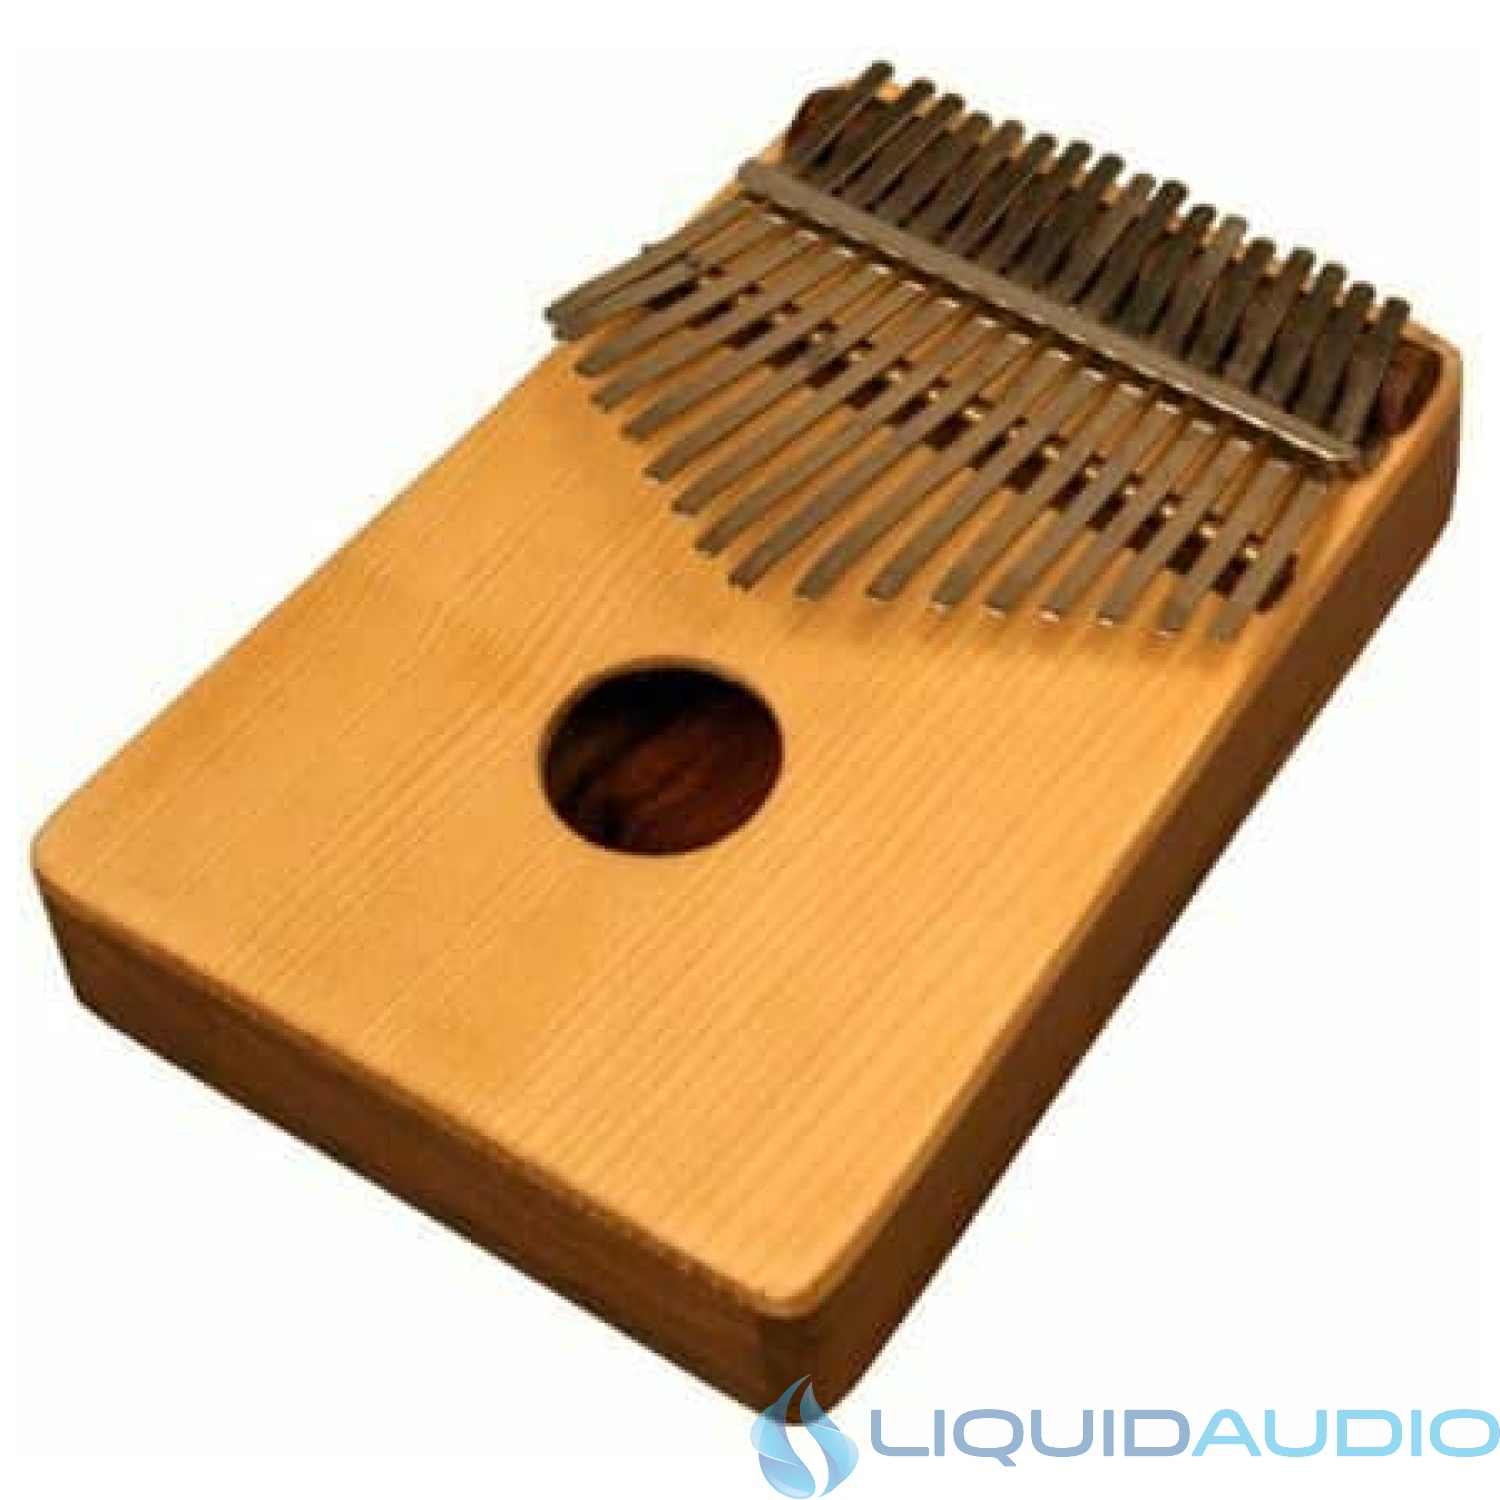 Thumb Piano, Spruce, Large